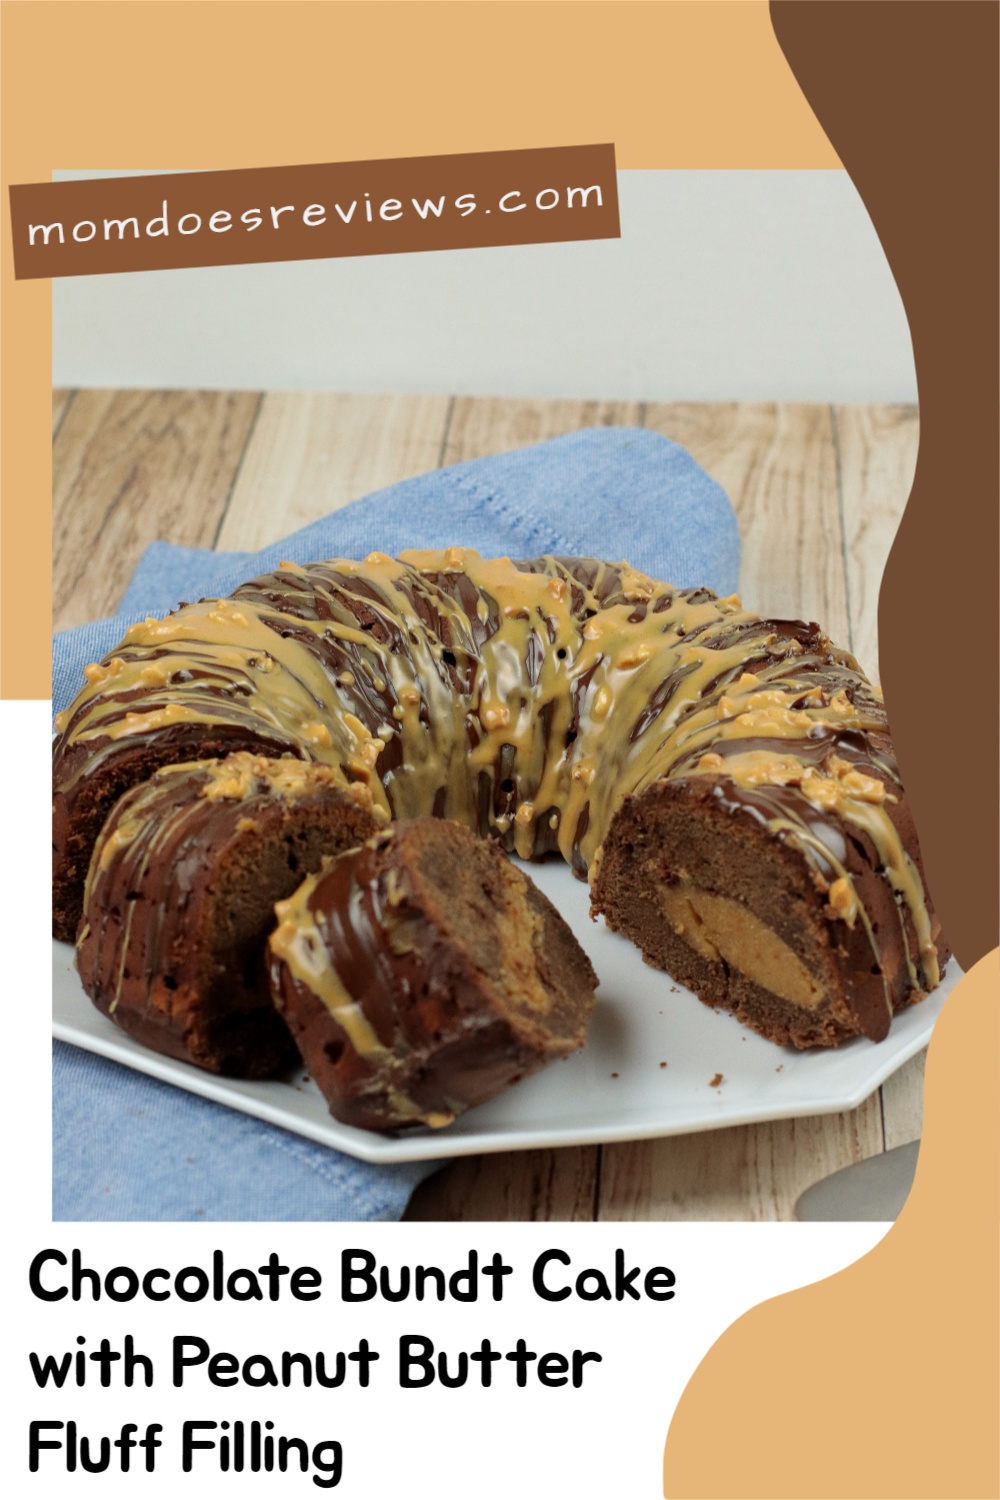 Chocolate Bundt Cake with Peanut Butter Fluff Filling